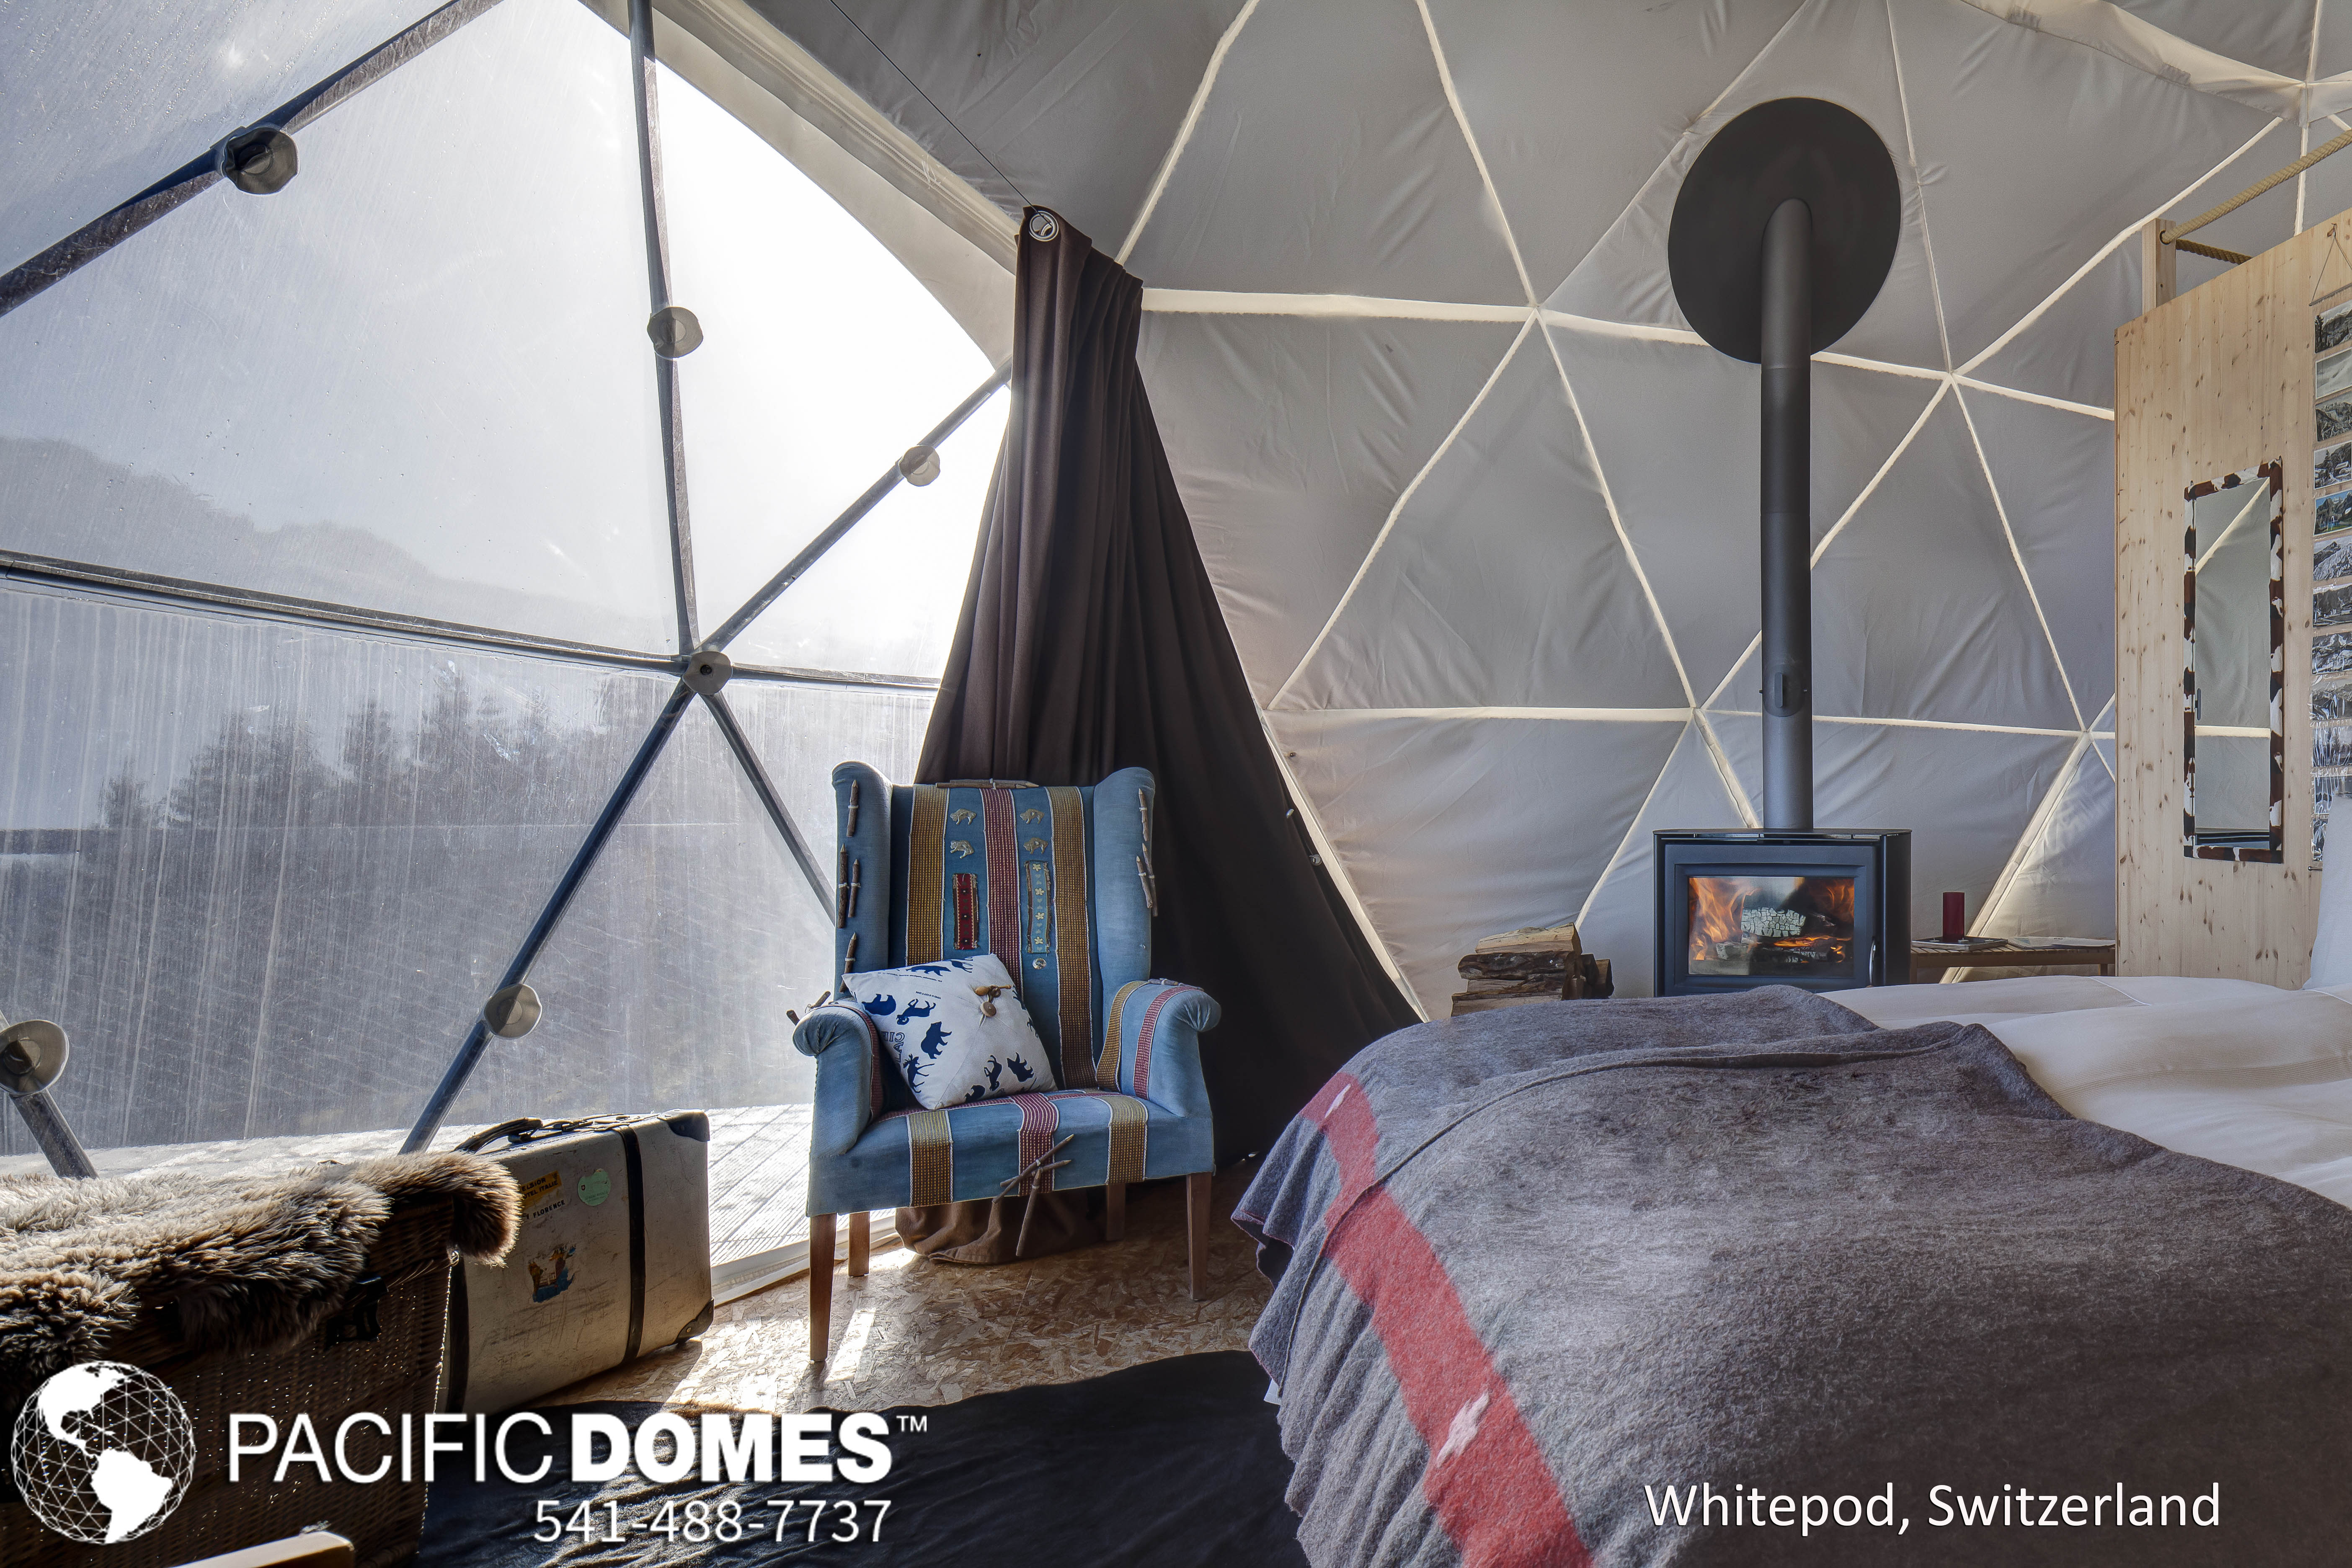 price dome homes, tiny dome houses, ecodomes. prices of dome homes